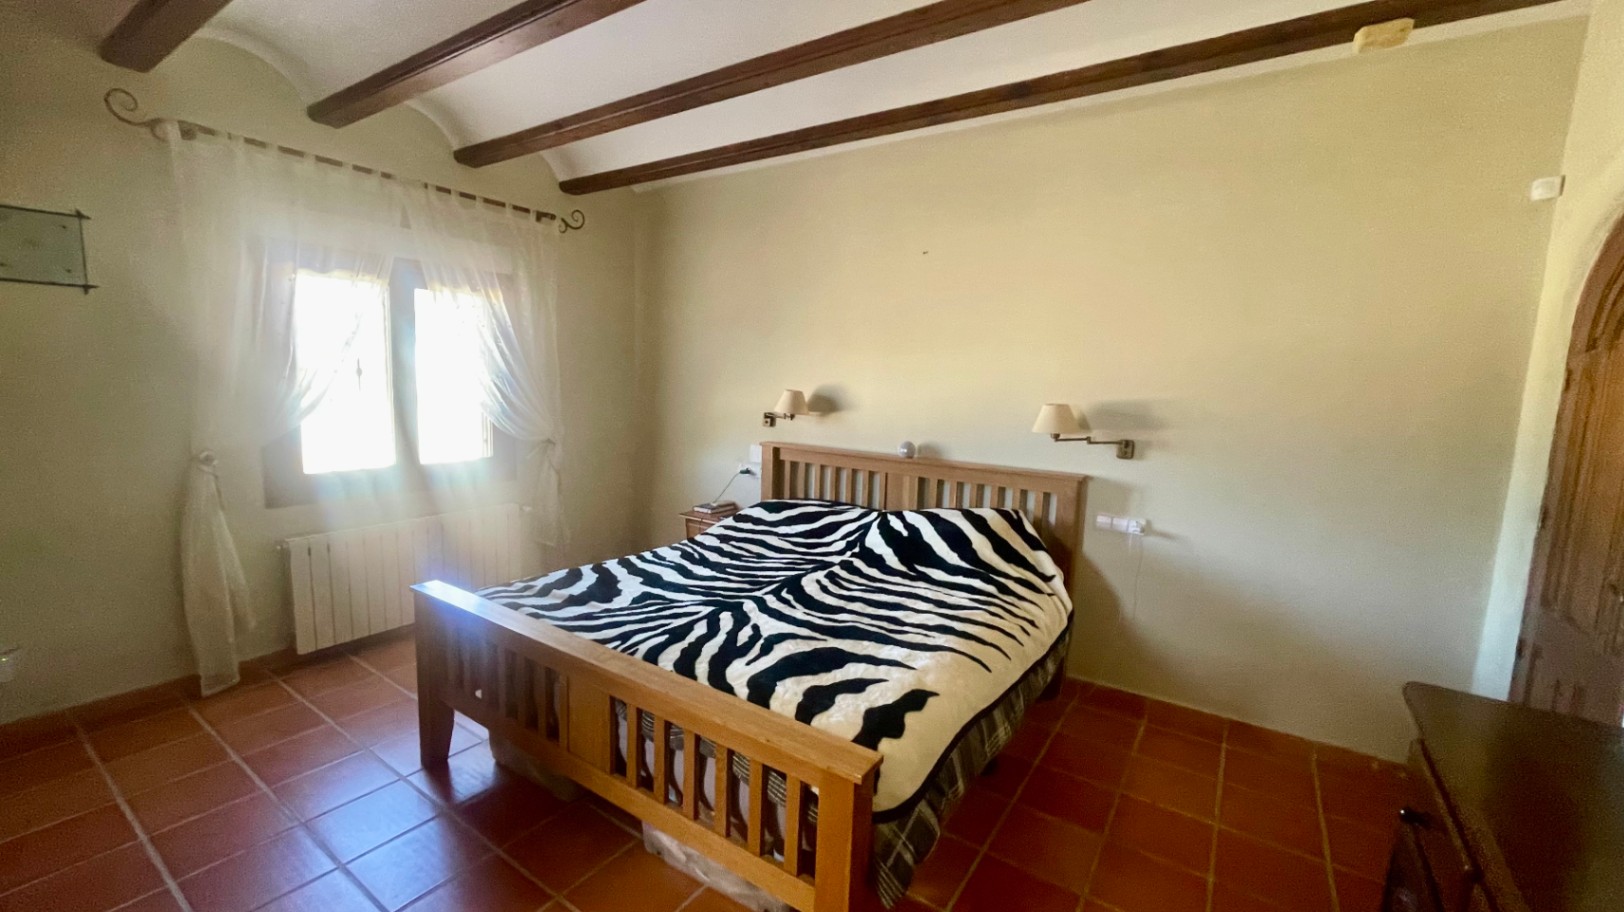 Finca with commercial license for disabled holiday retreat